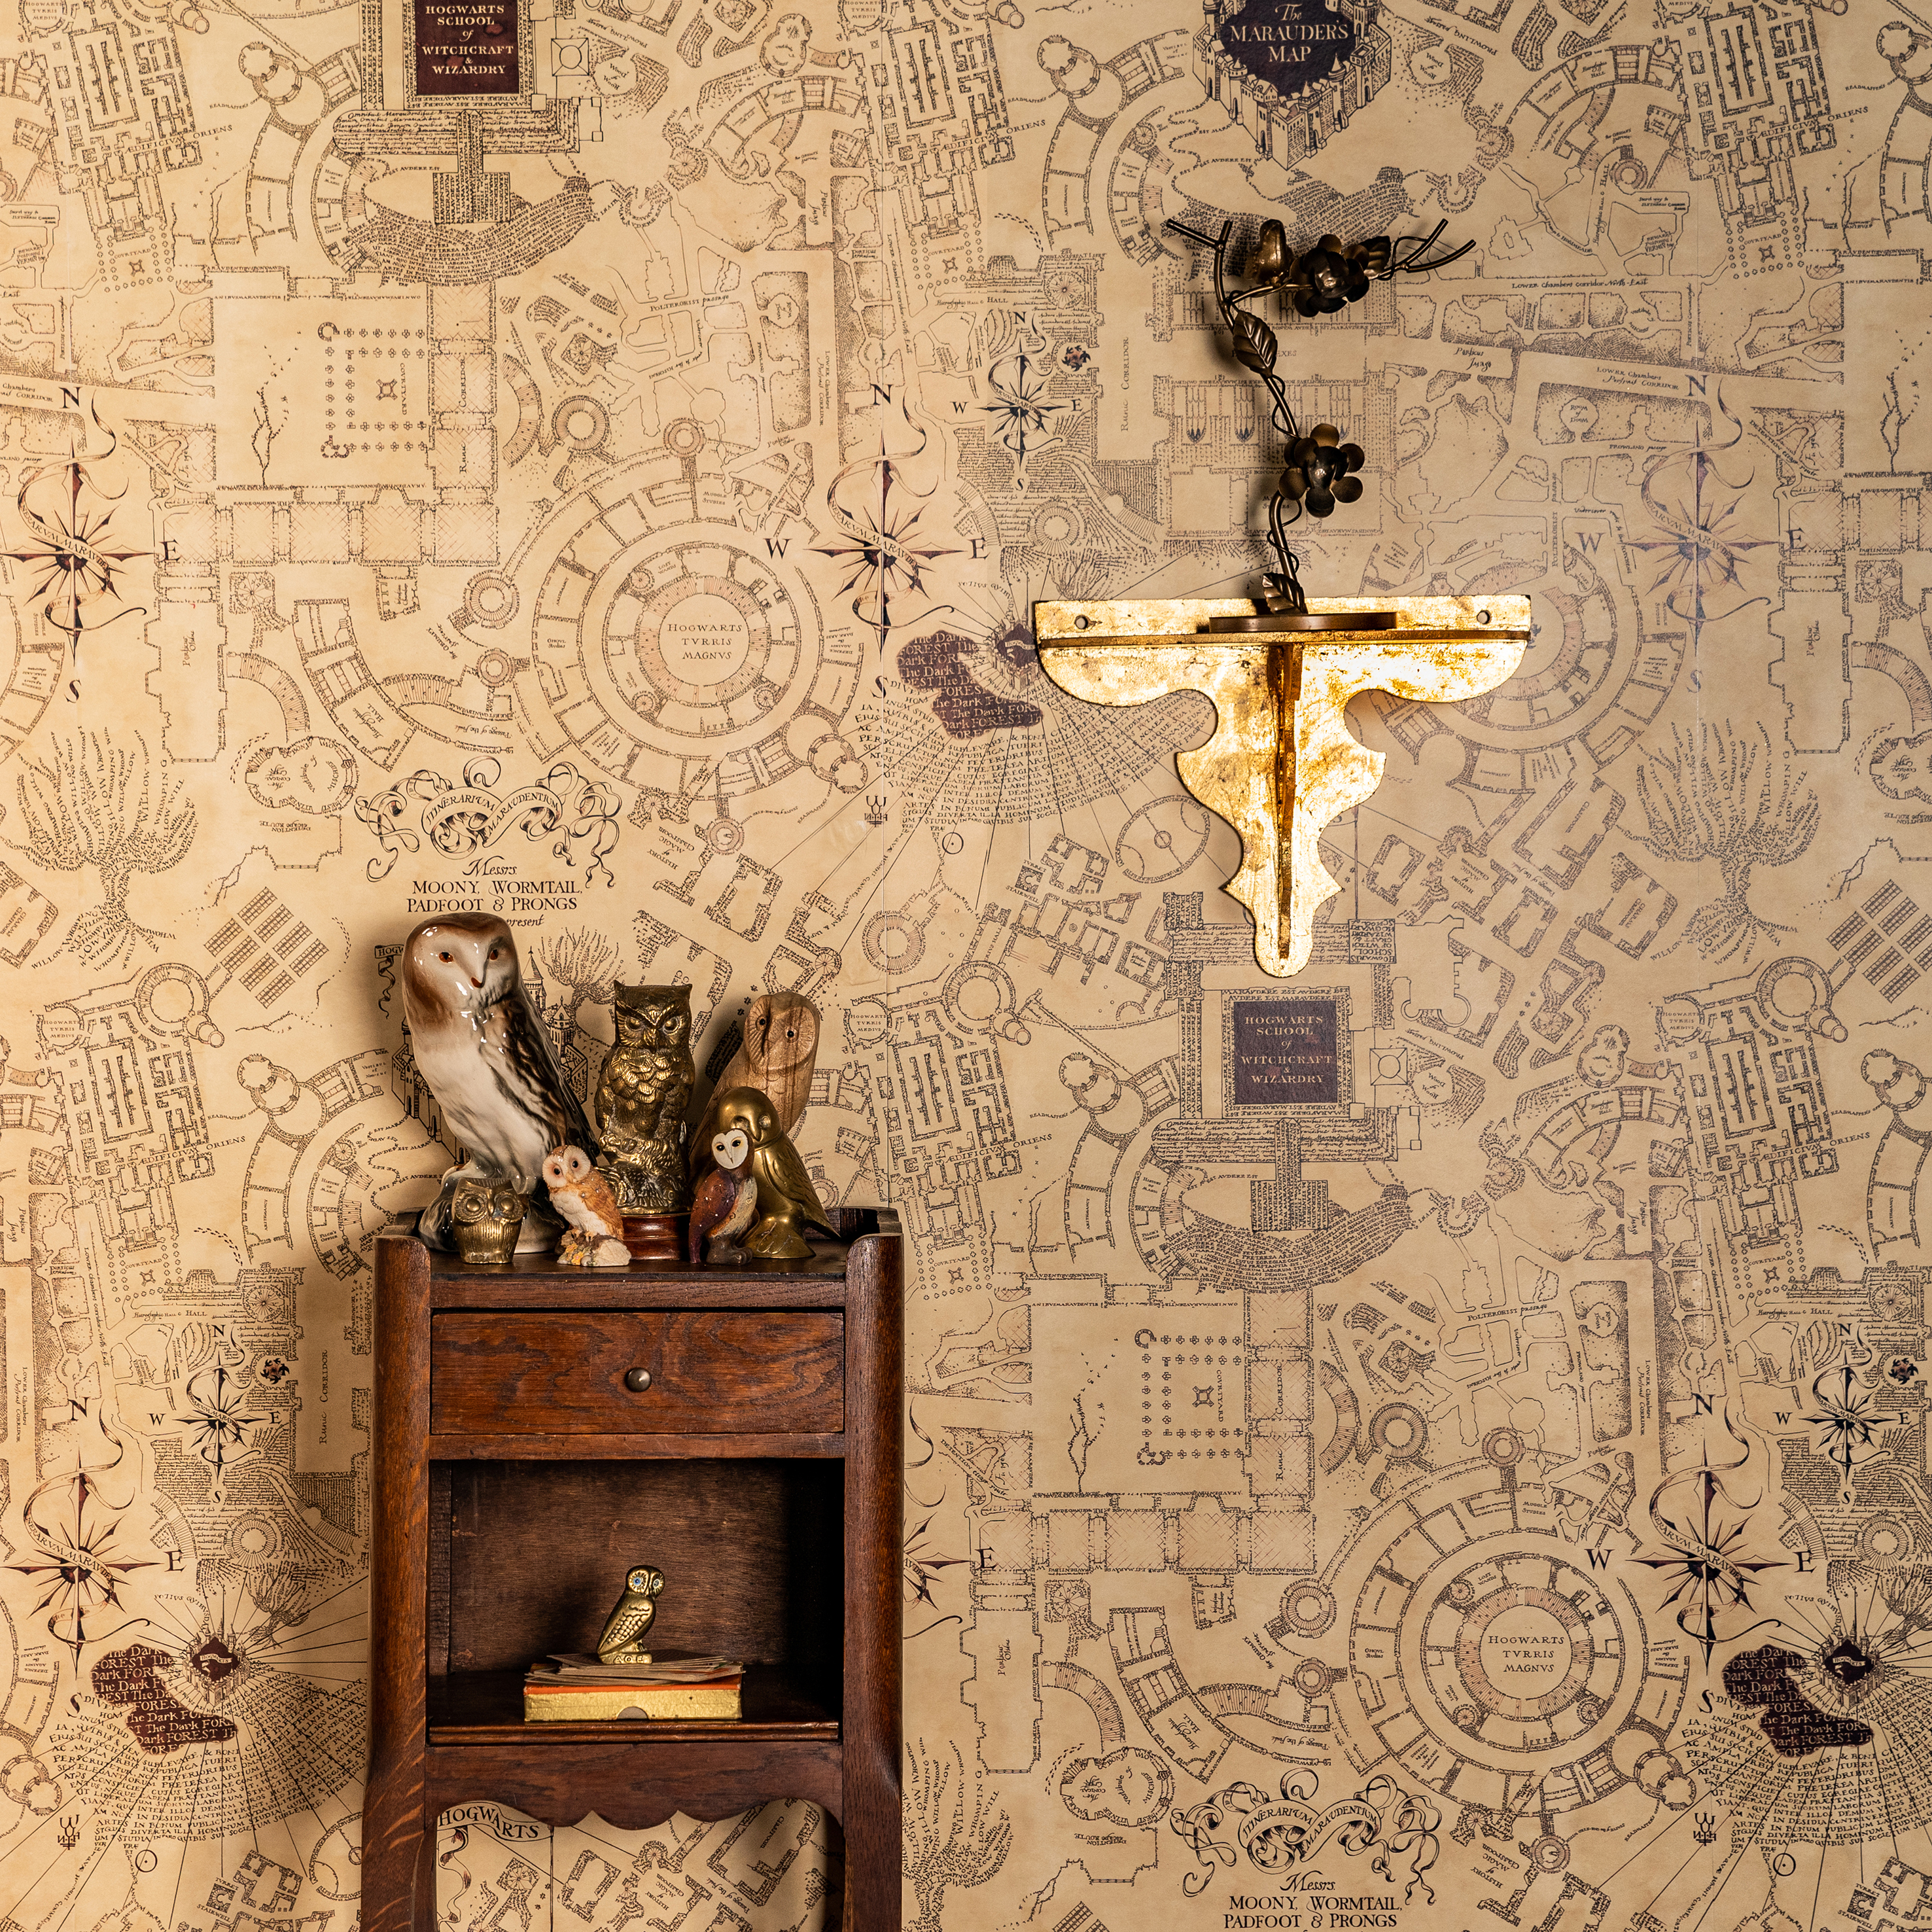 MinaLima’s Marauder’s Map wallpaper shows an expanded layout of Hogwarts Castle.